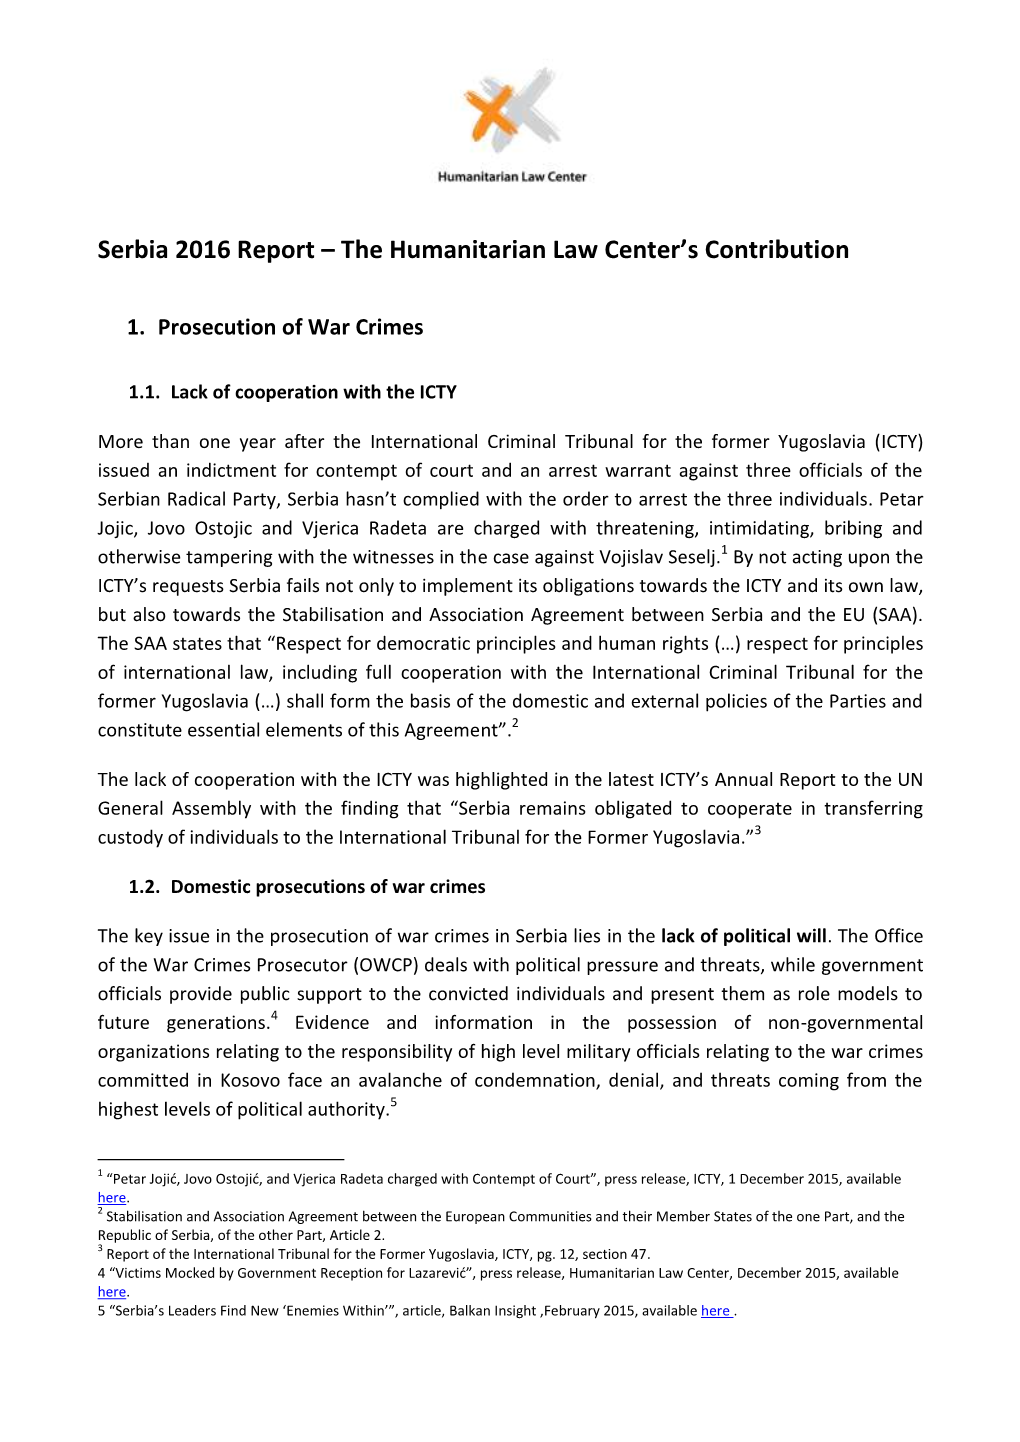 Serbia 2016 Report – the Humanitarian Law Center's Contribution